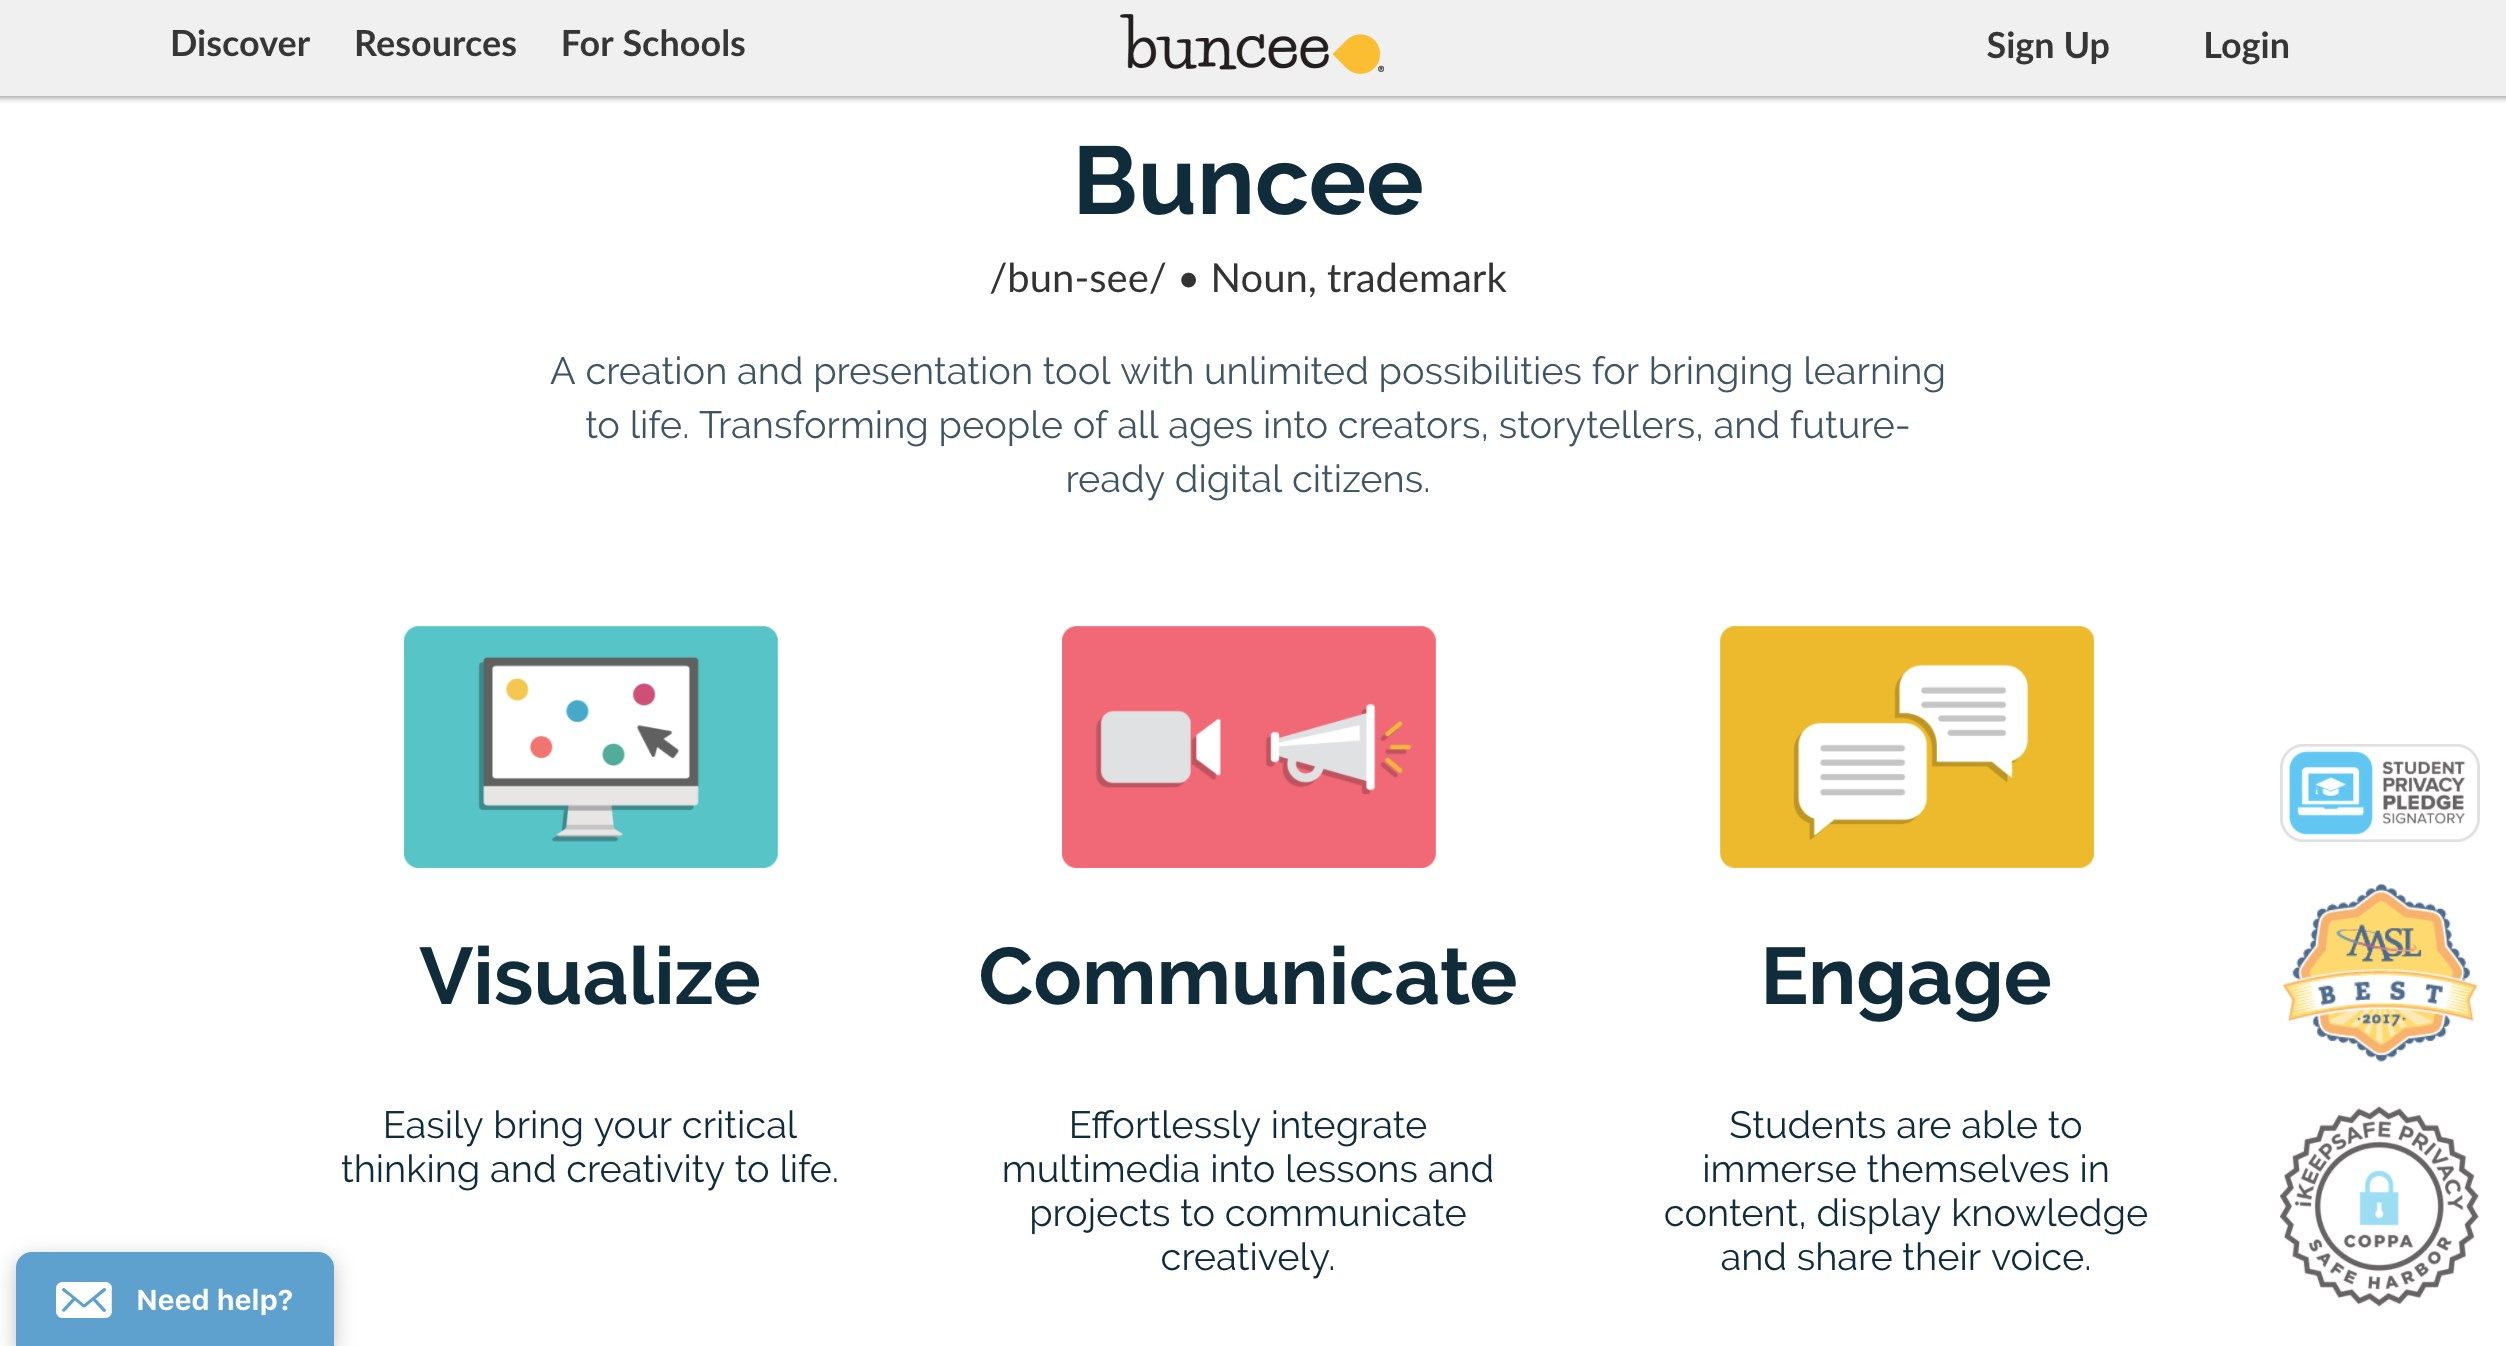 What is Buncee?